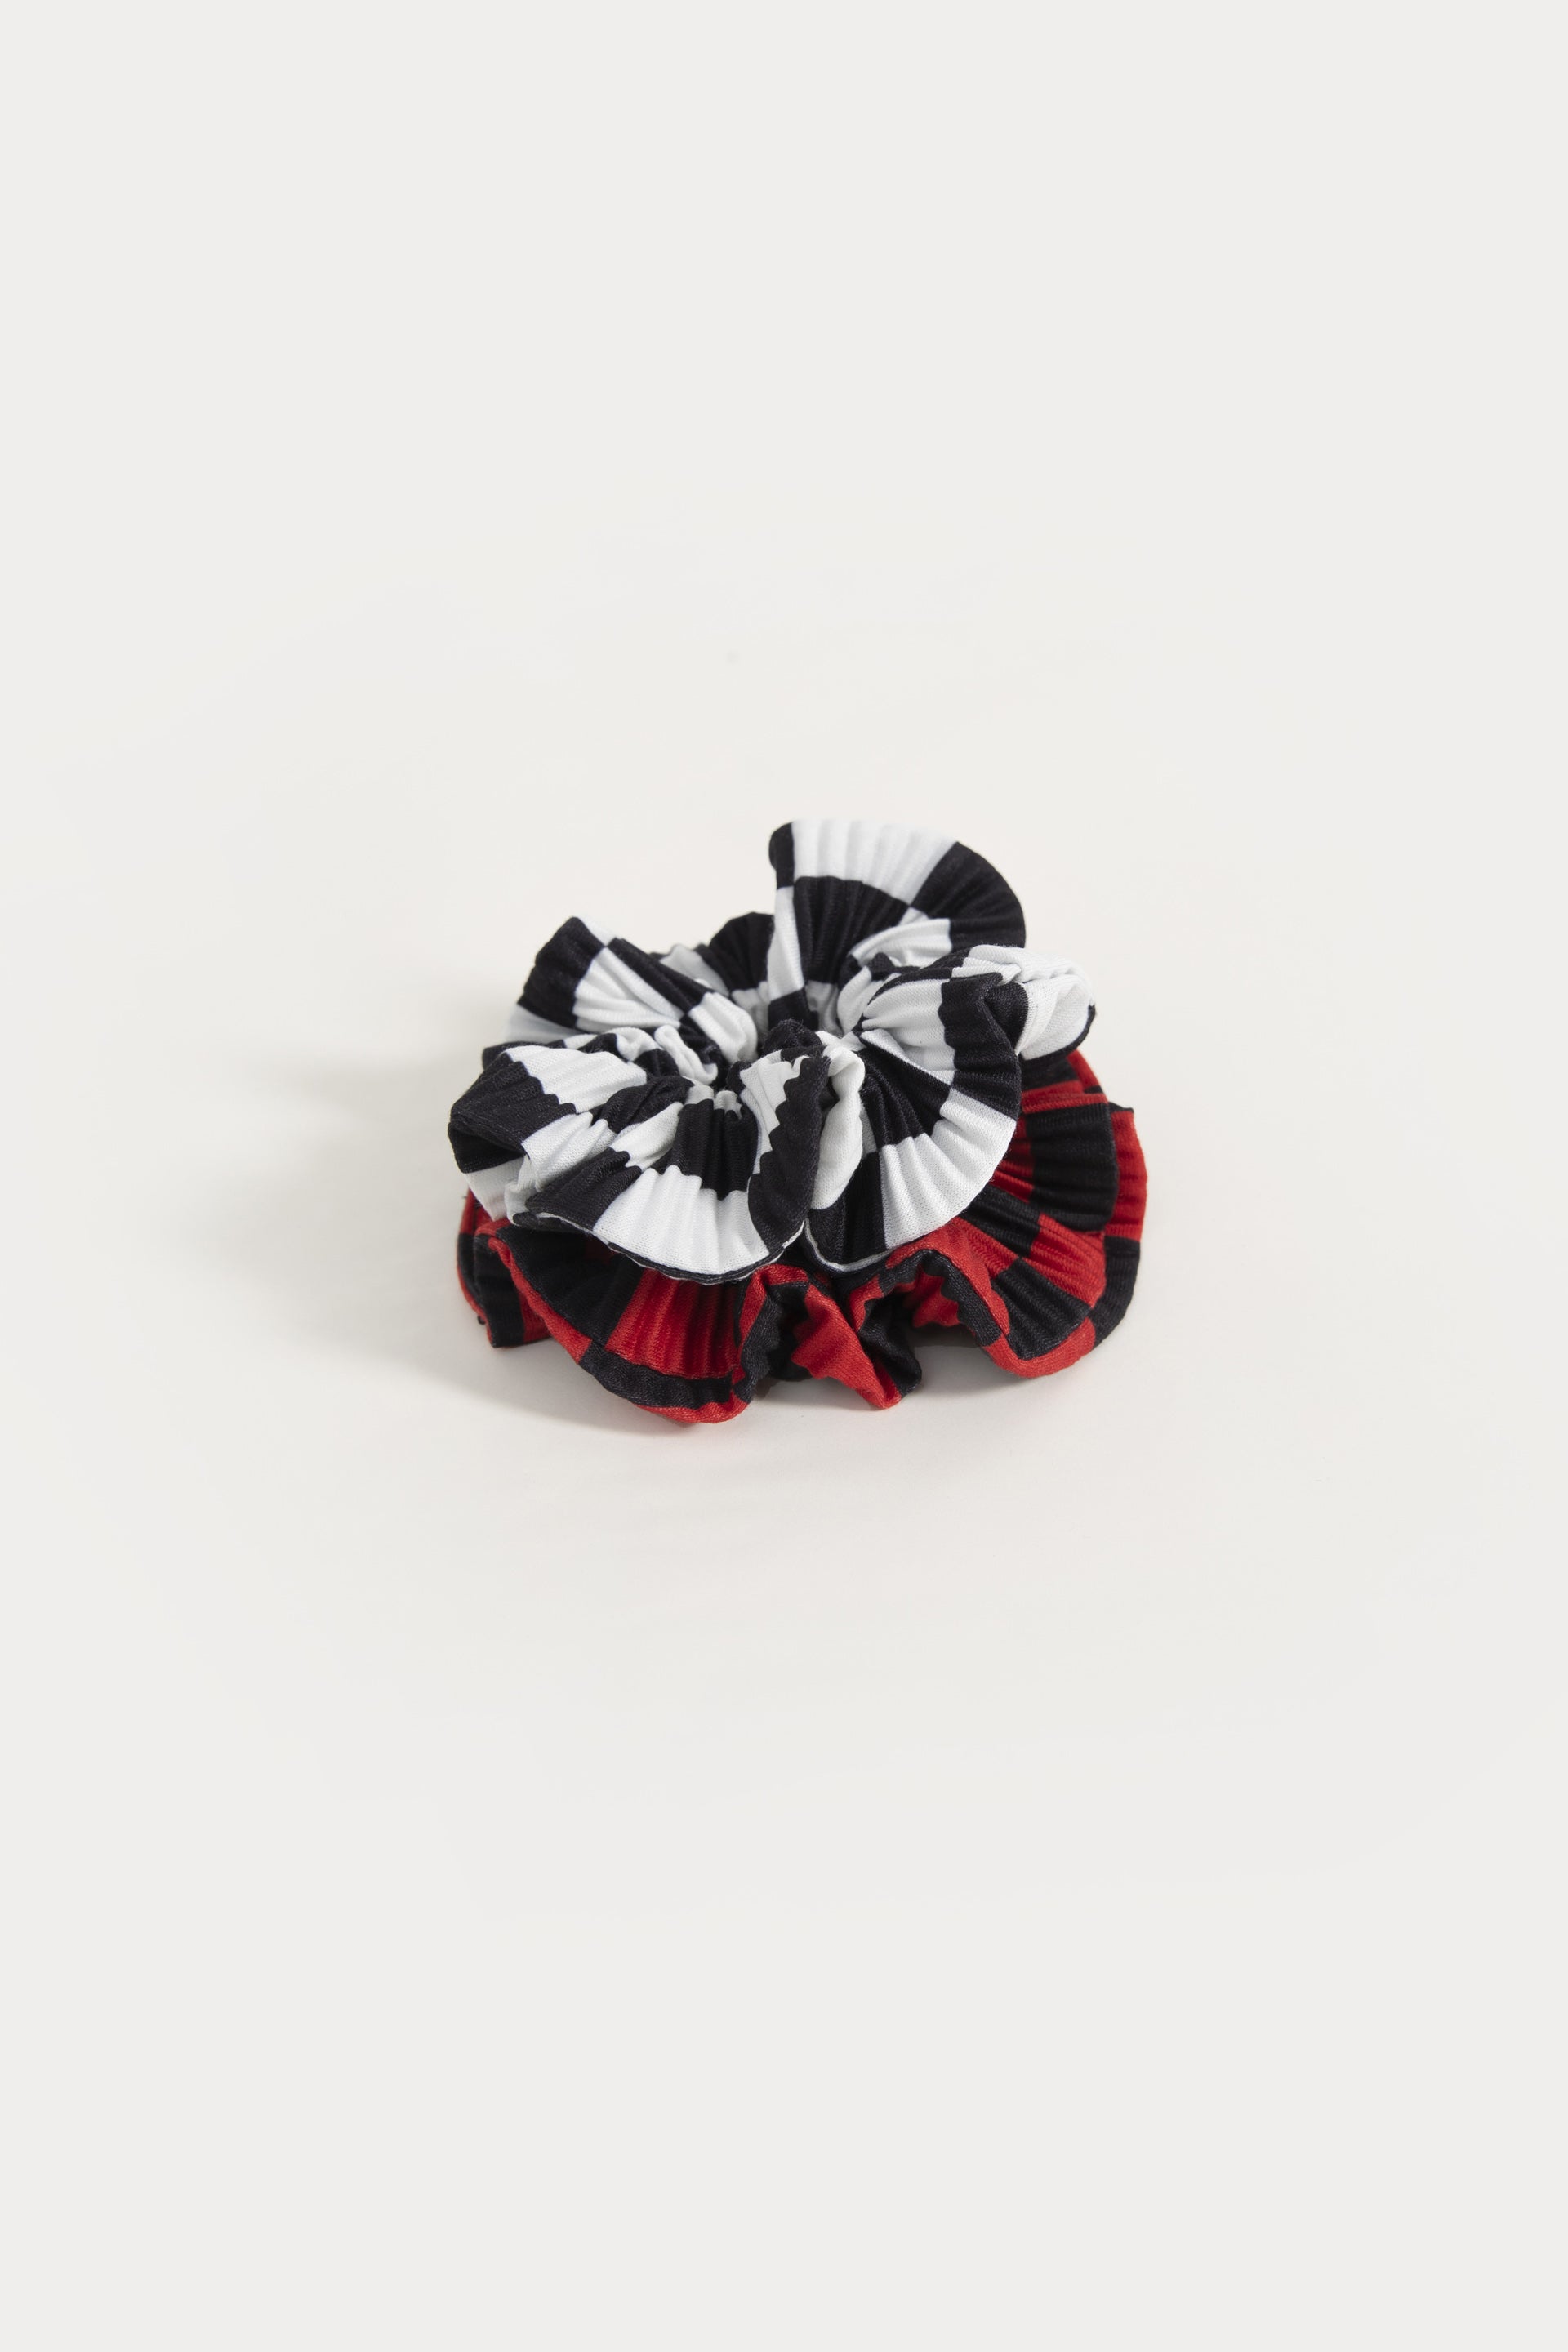 Pair of Pleated Checkered Scrunchies